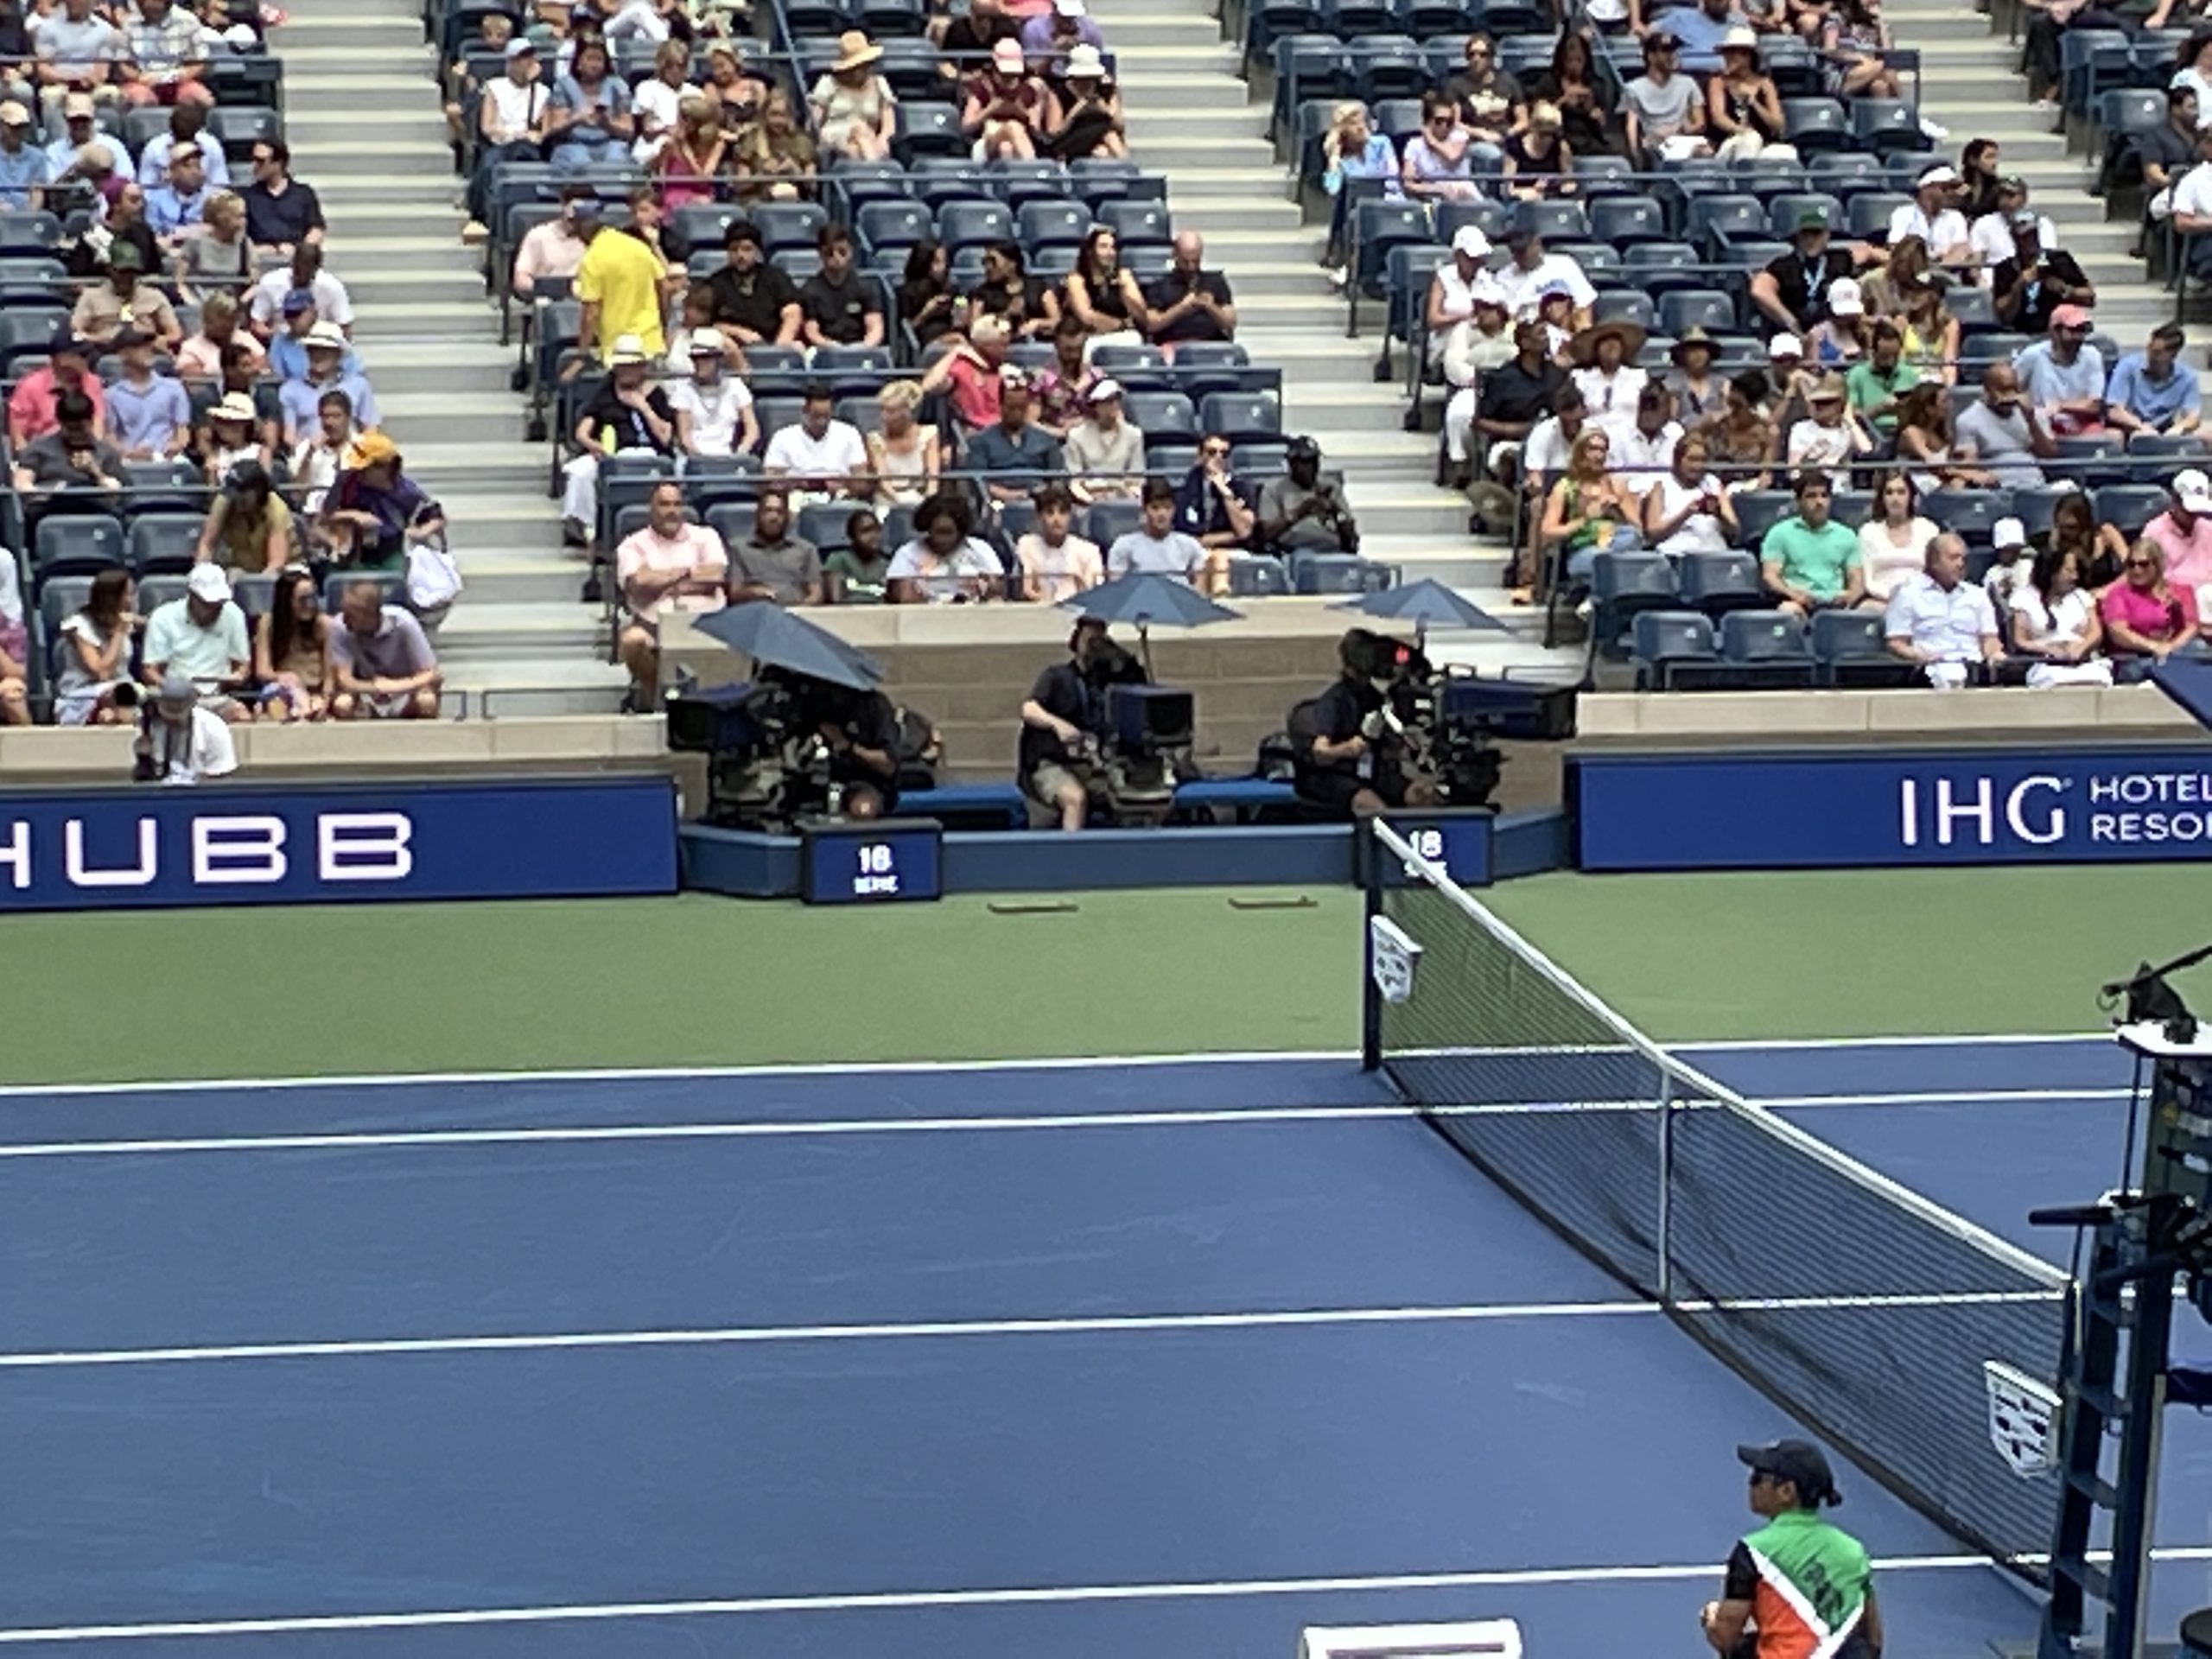 Live From US Open 2022 USTA Offers Seamless In-Venue Experience Across Sprawling Campus